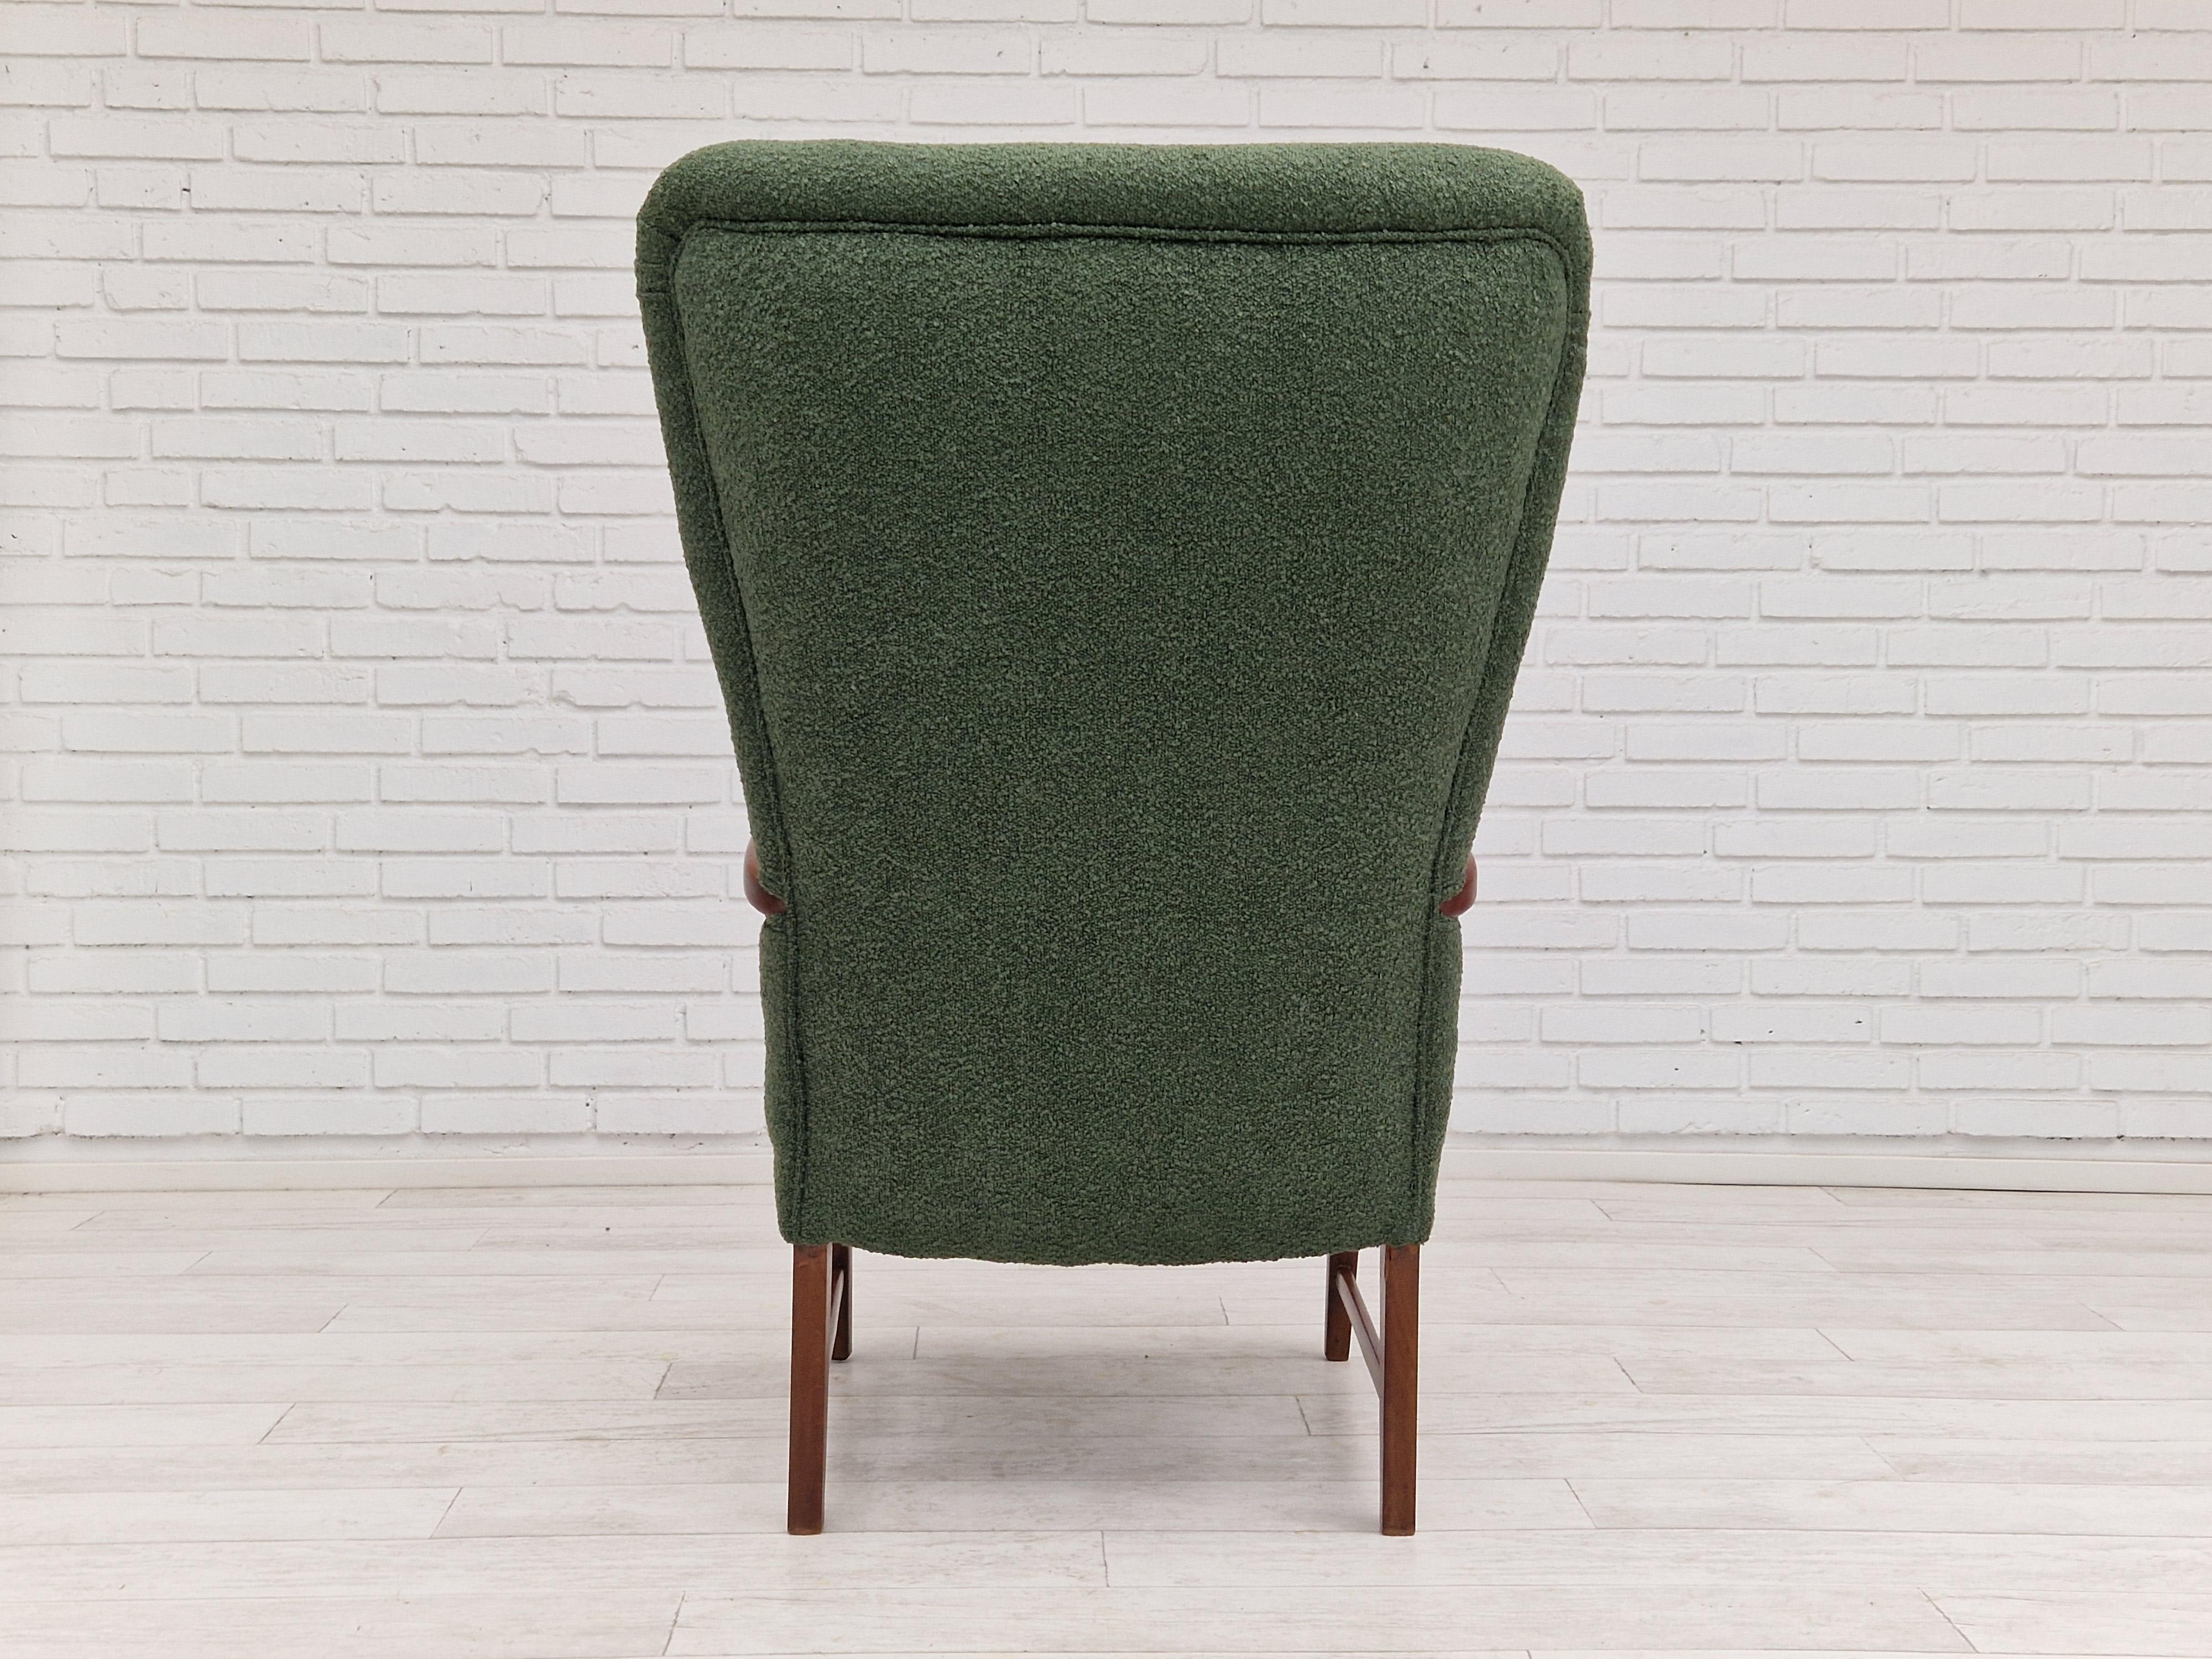 Fabric 1960s, Danish design, reupholstered high-back armchair, bottle green fabric. For Sale